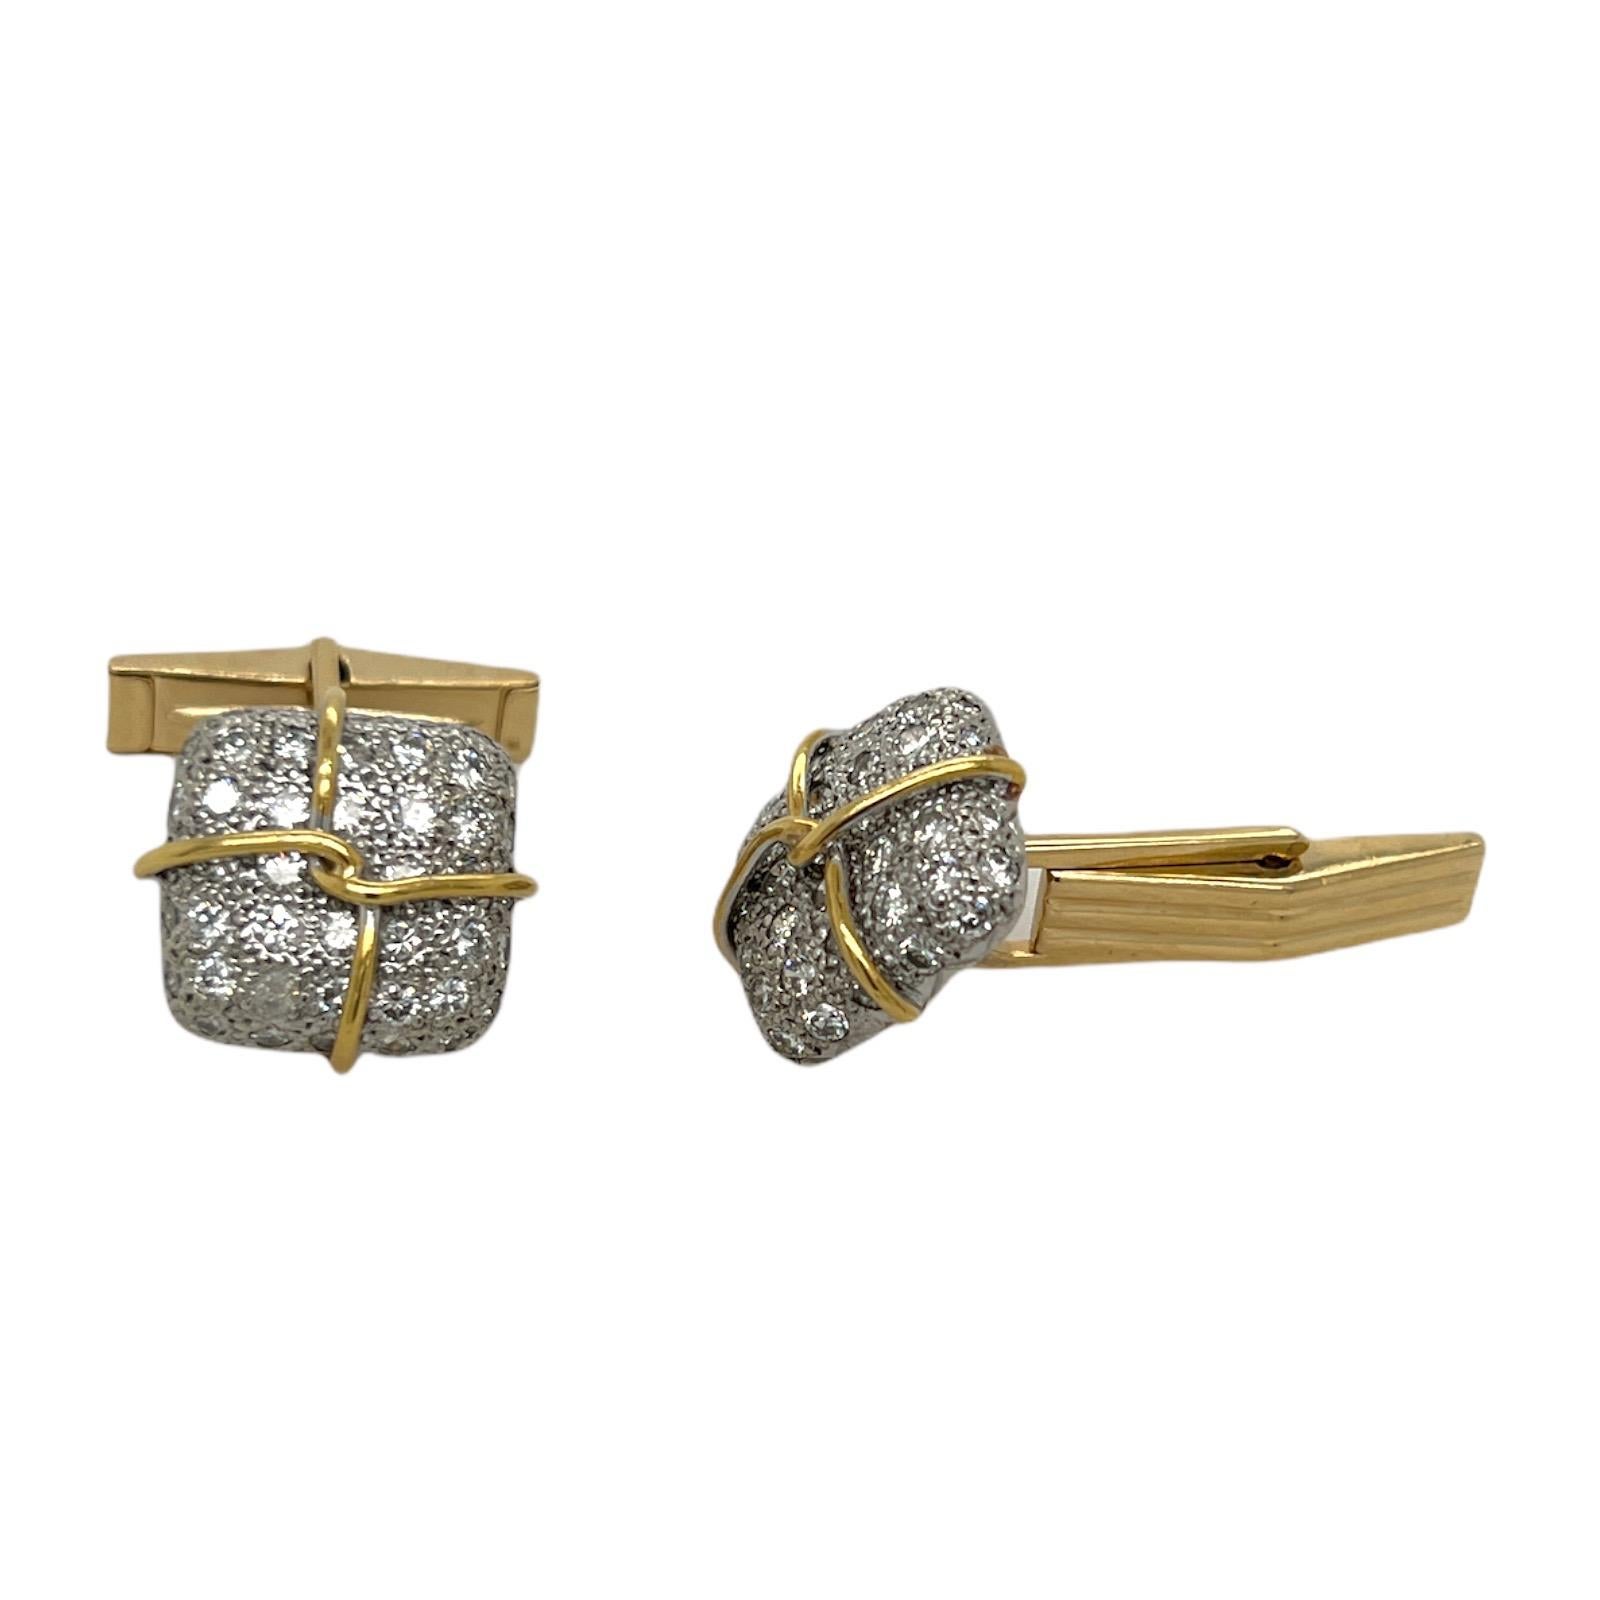 Diamond cufflink and stud set crafted in 14 karat white and yellow gold. The set features round brilliant cut diamonds weighing approximately 2.00 carat total weight and graded H-I color and SI clarity. The cufflinks measure 15 x 15mm, and the studs